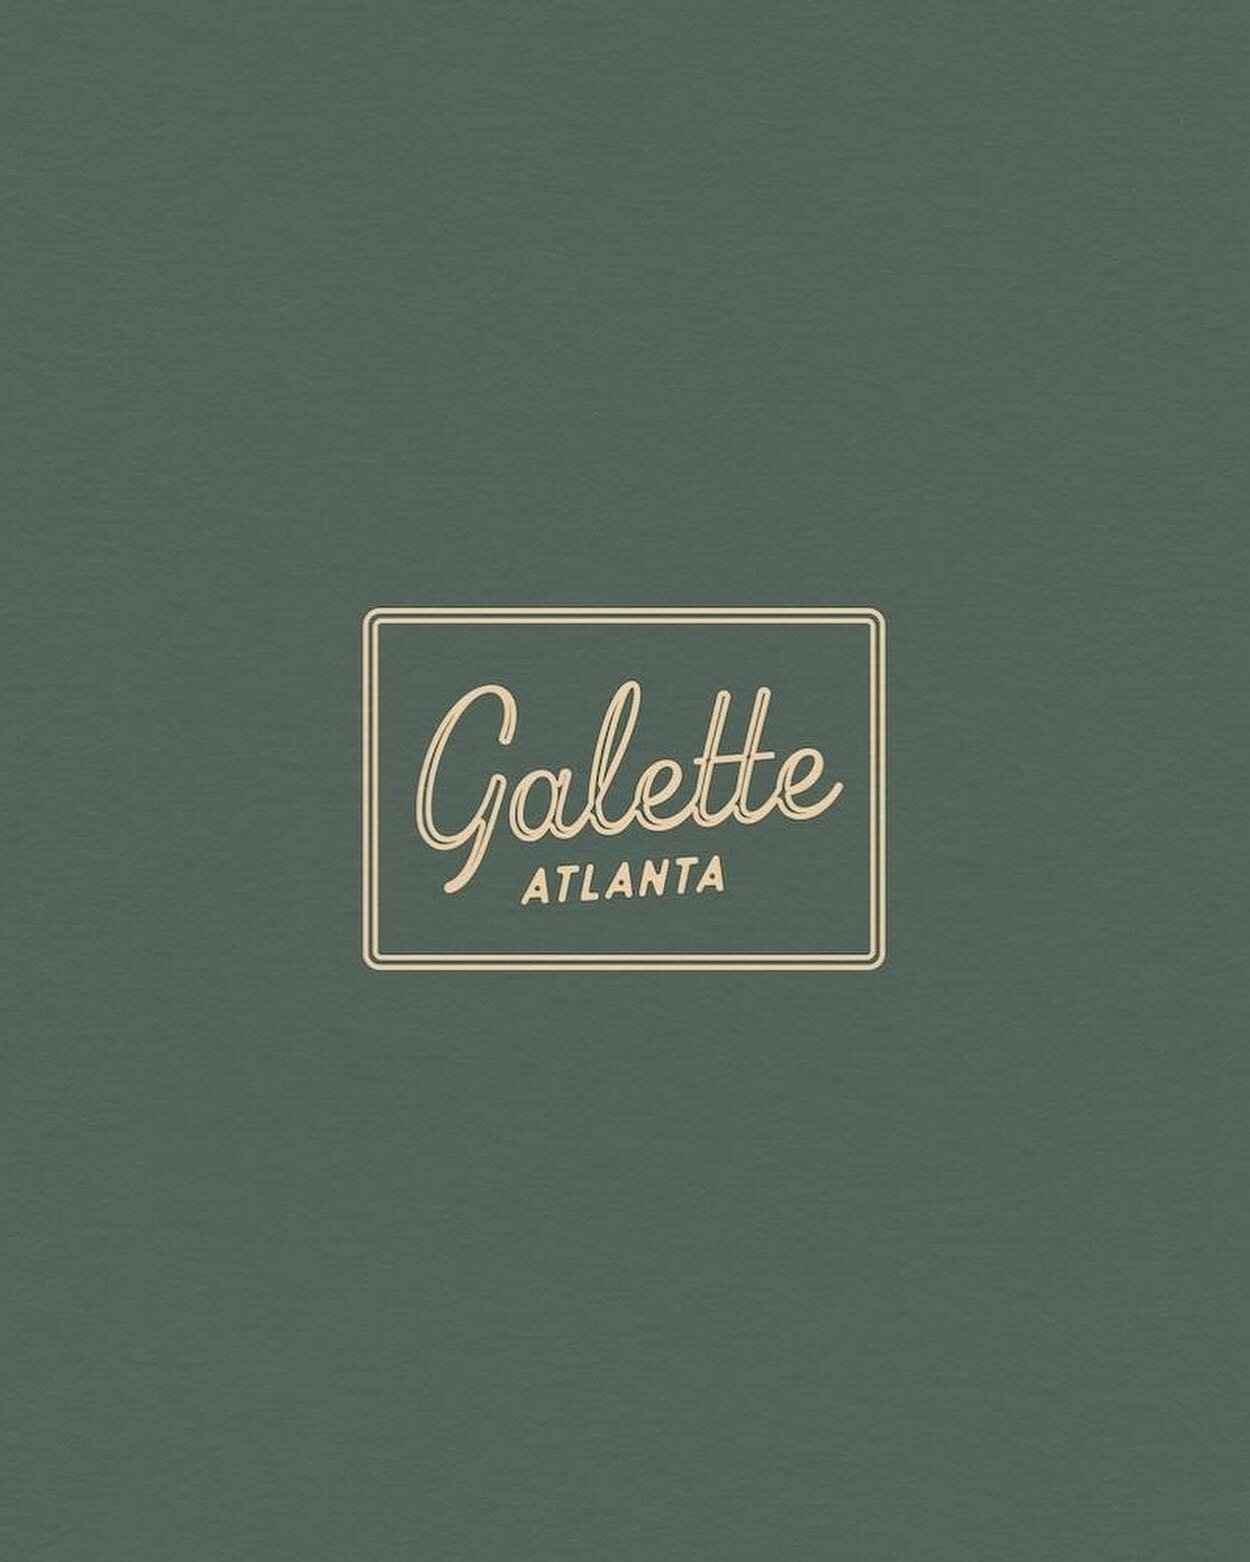 Our friends at @galetteatl were rained out of their avondale estates farmers market. VAHI! Come out for their delicious pastries! Galette has so many goodies to share! Think of it as a sneak preview - they are coming to our vahi farmers market once a